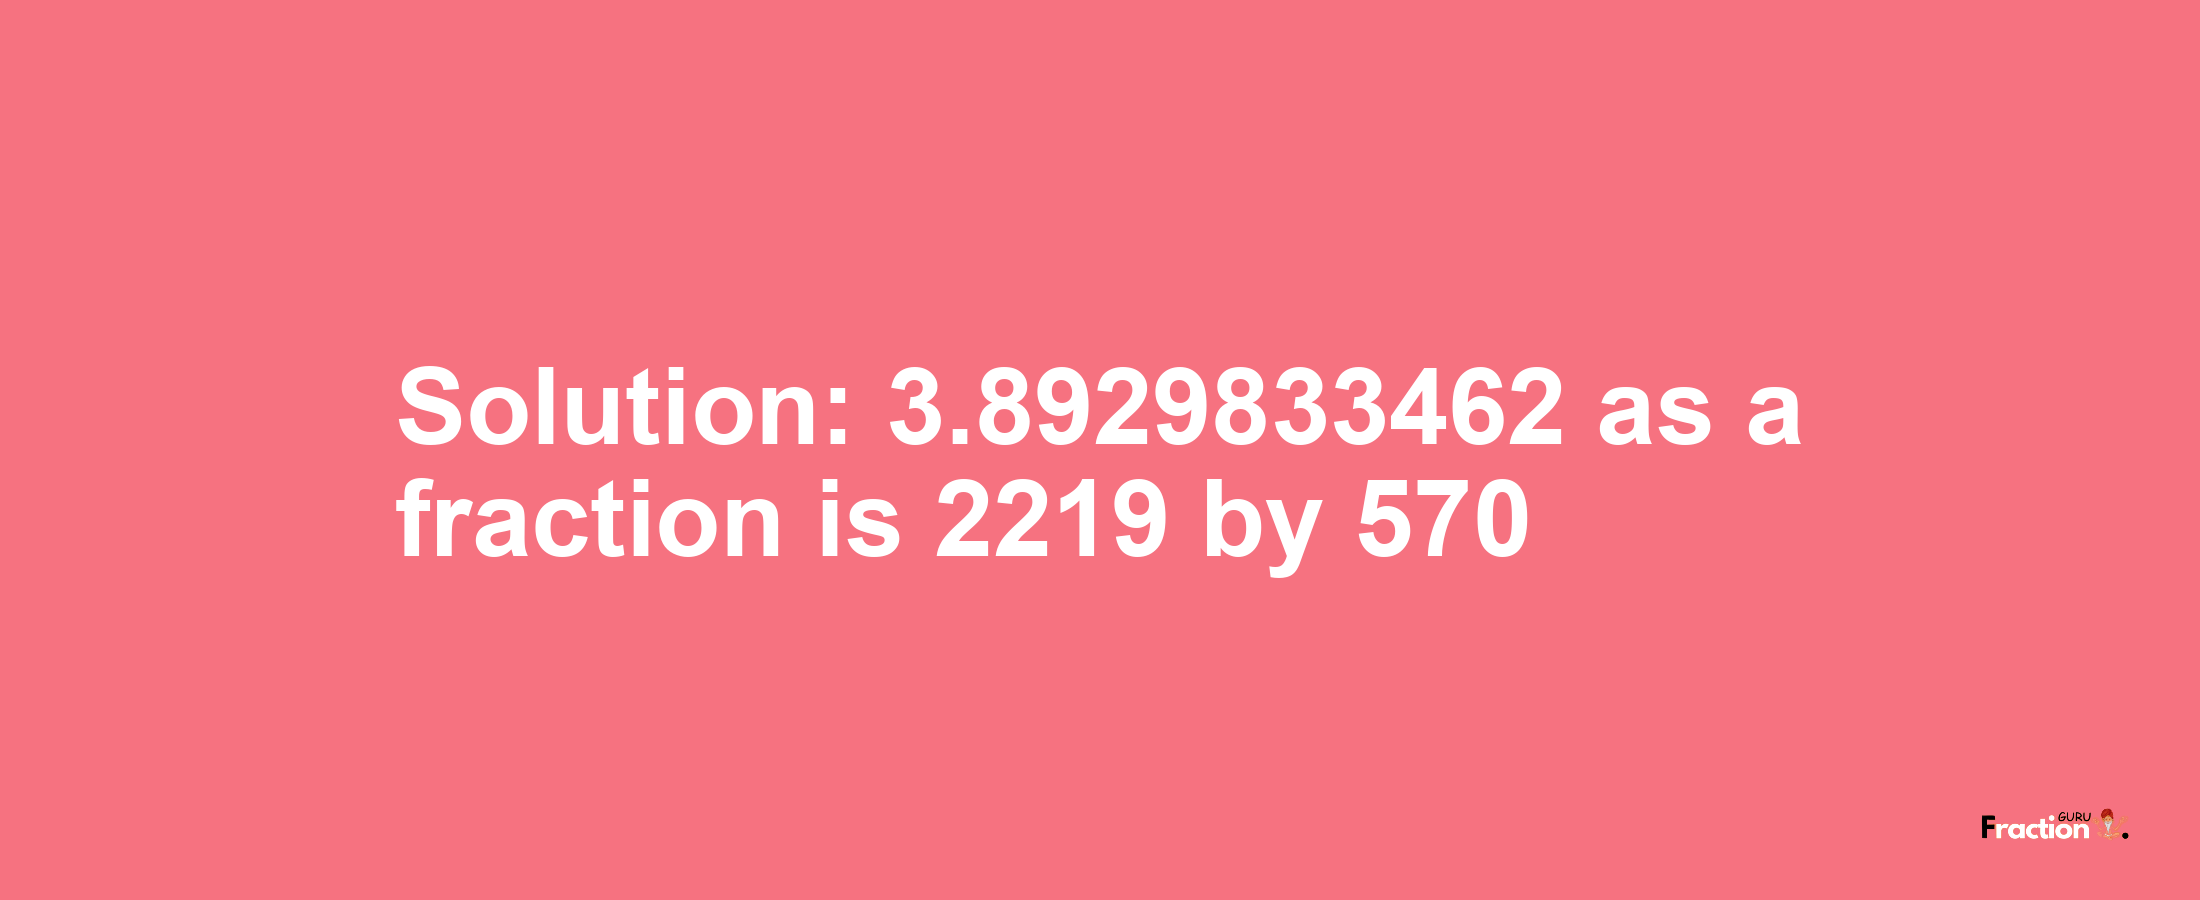 Solution:3.8929833462 as a fraction is 2219/570